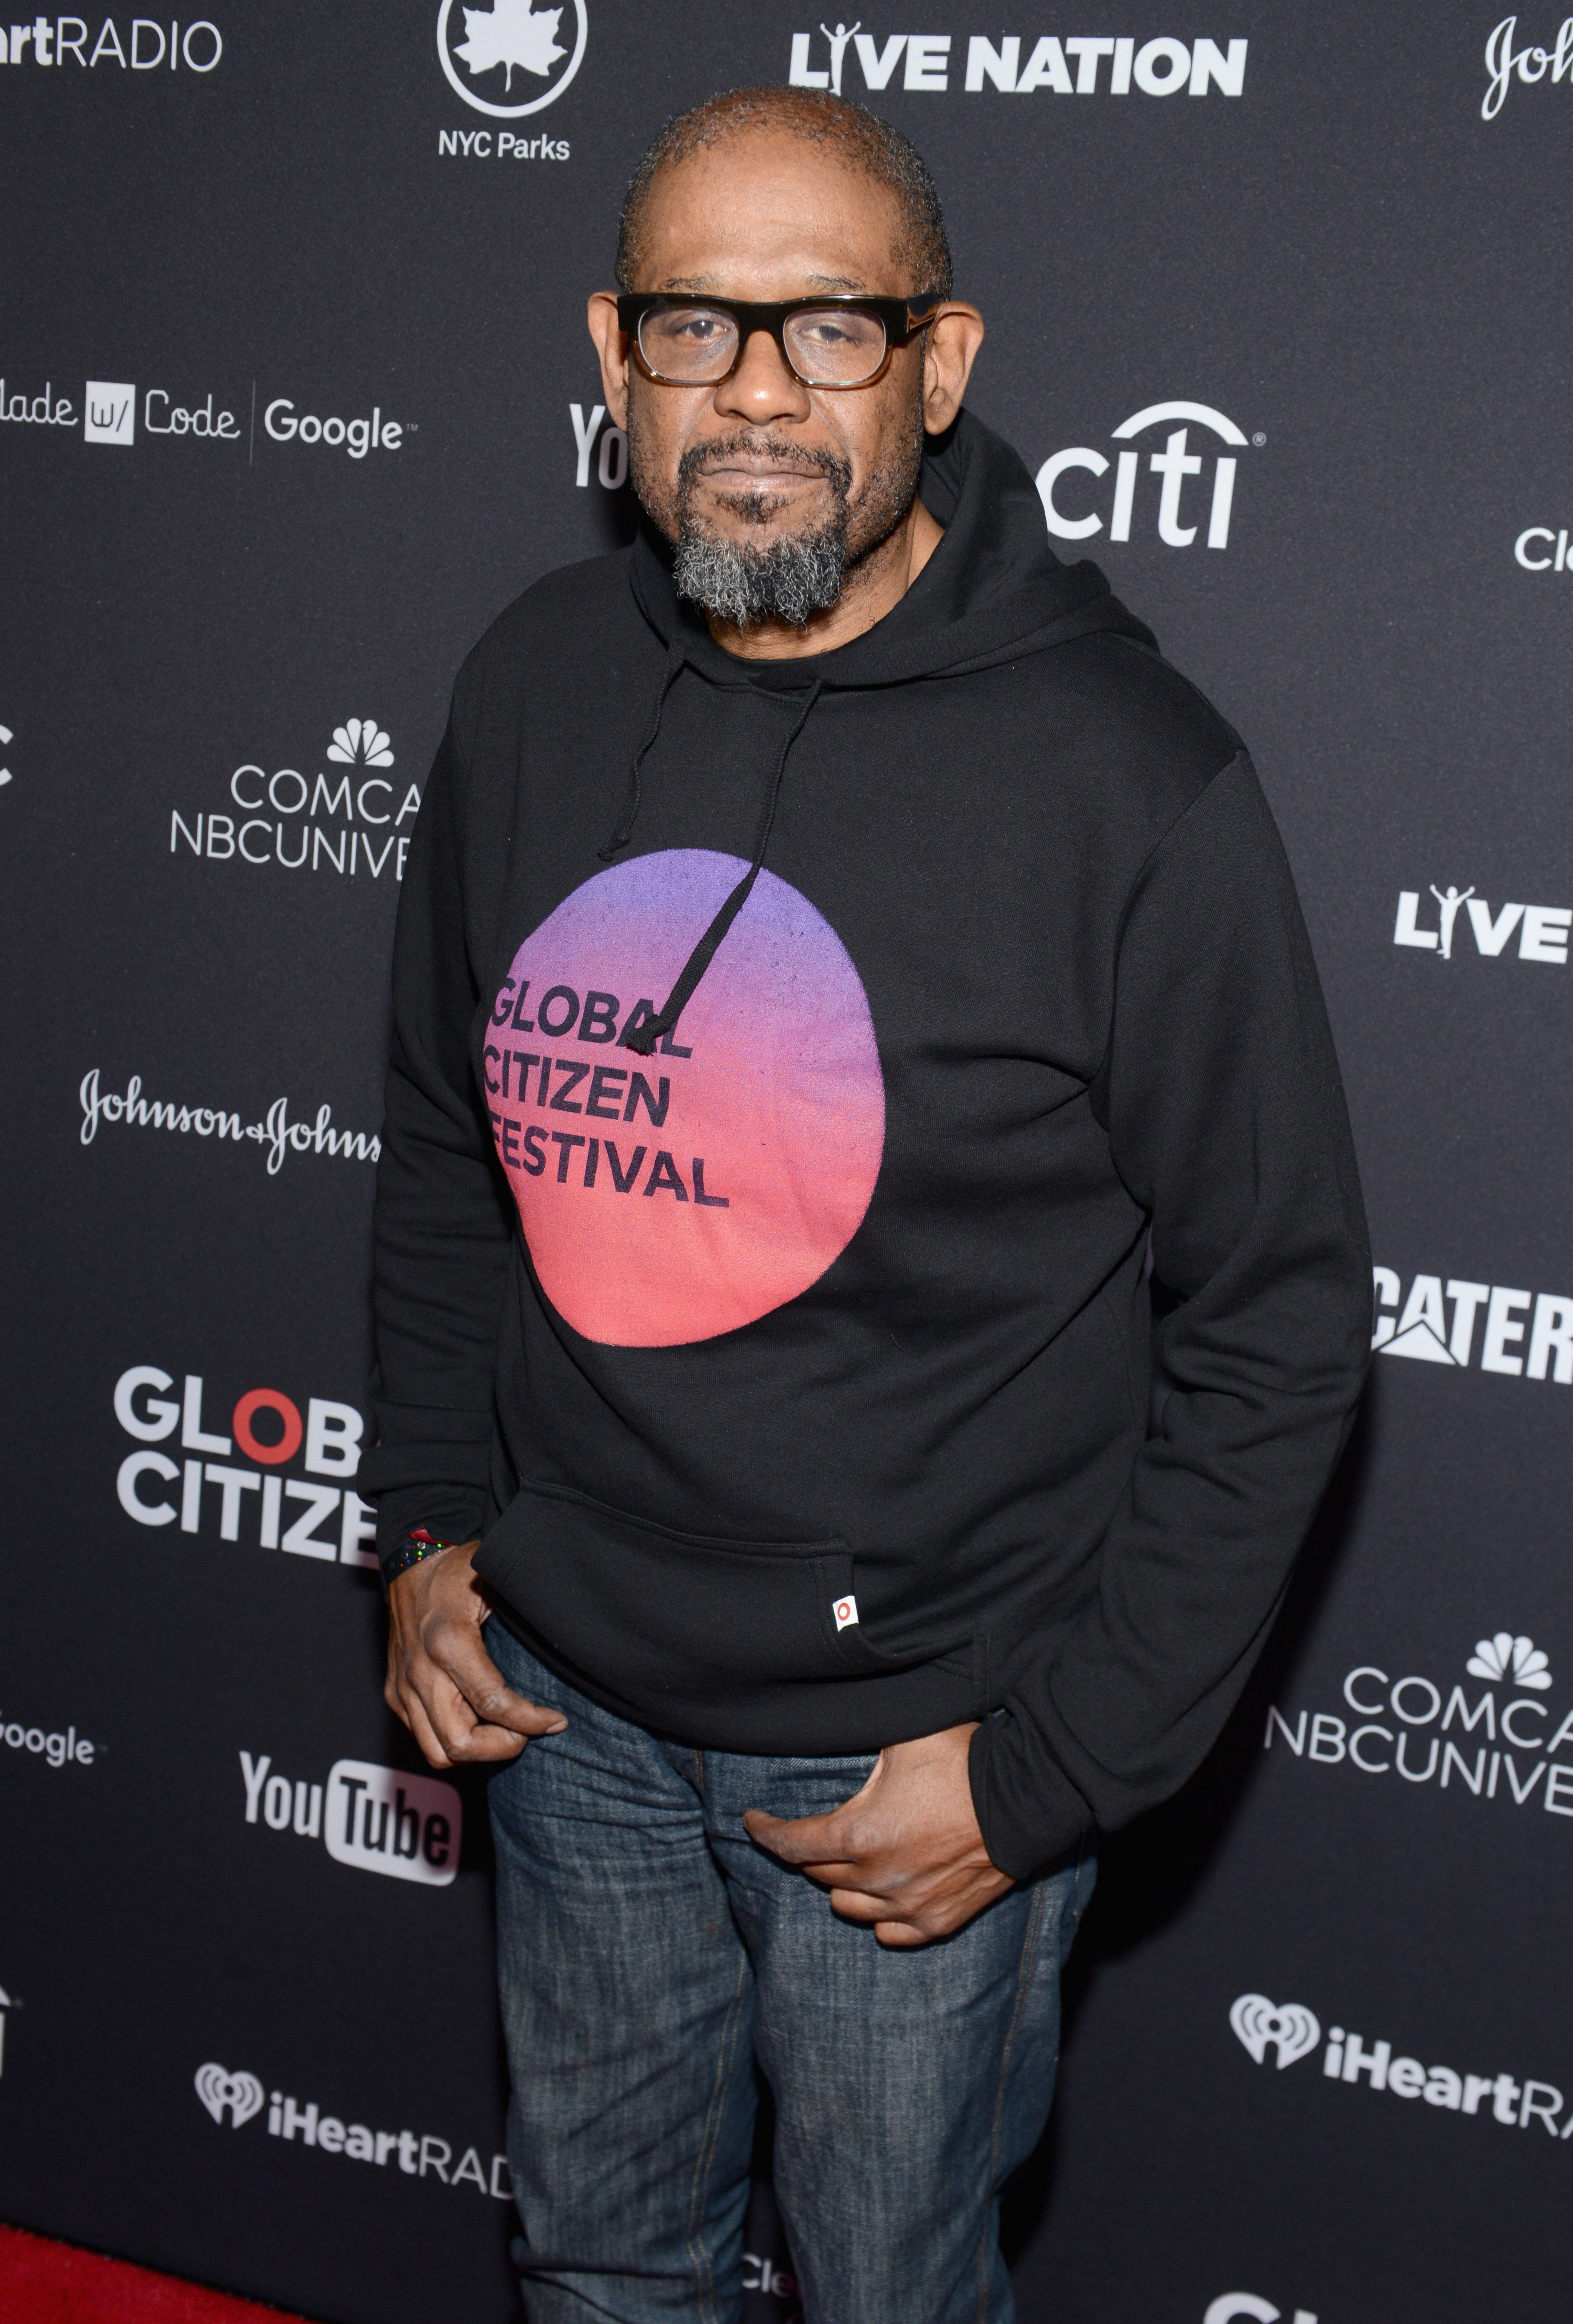 Forest Whitaker attends the 2016 Global Citizen Festival In Central Park To End Extreme Poverty By 2030 at Central Park on September 24, 2016 in New York City